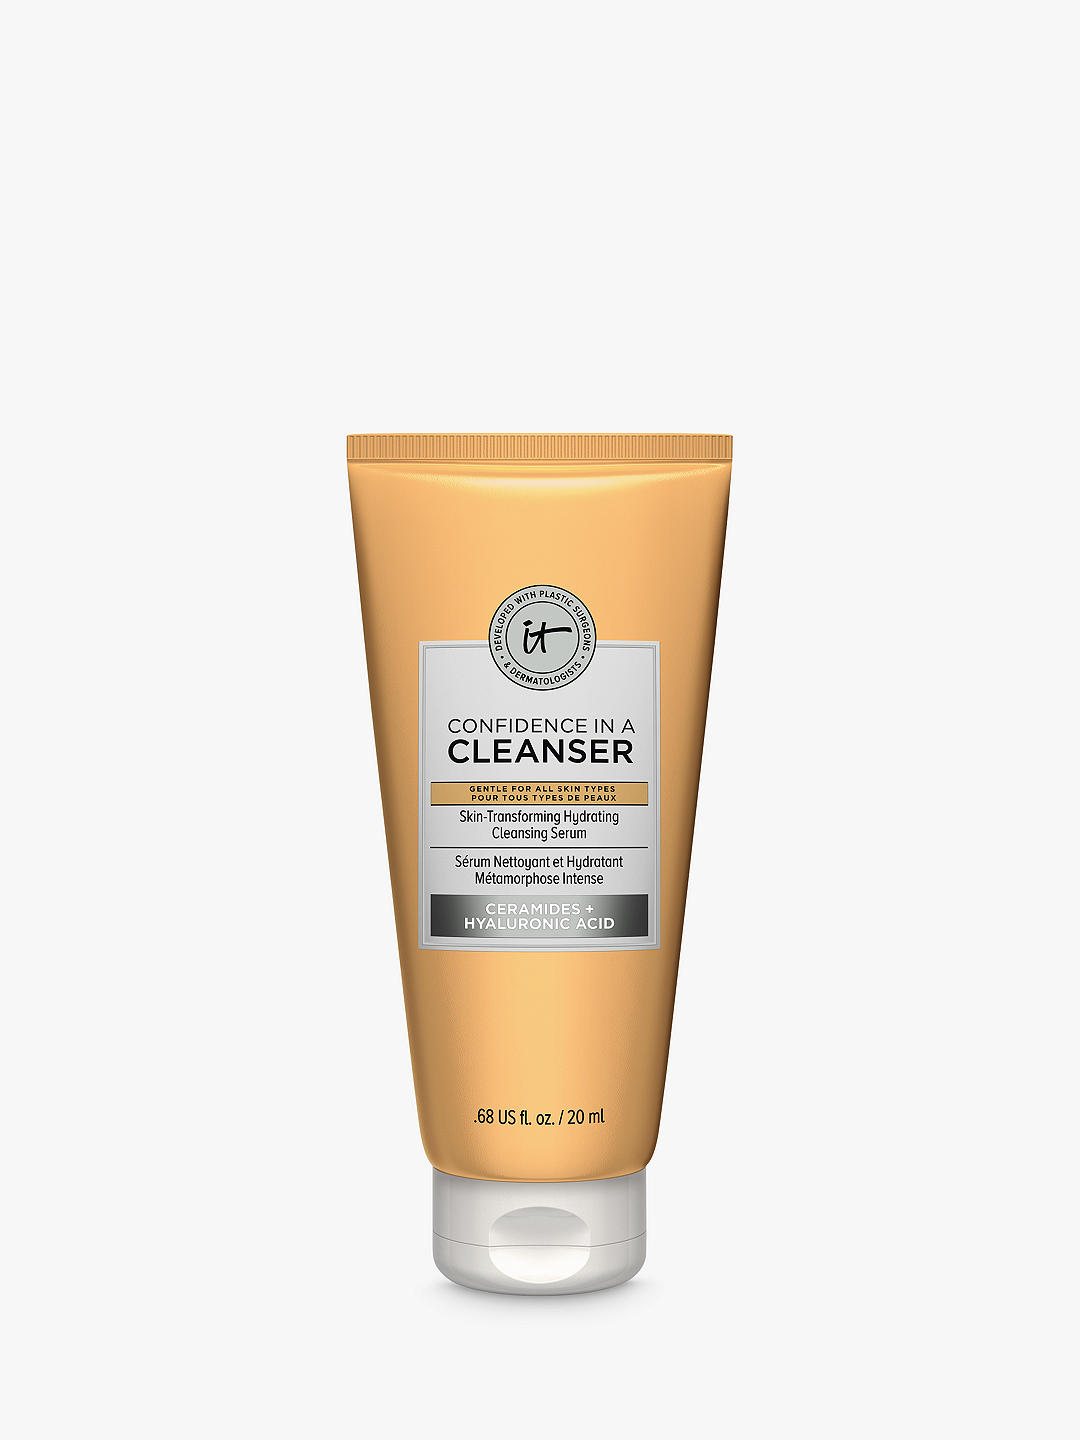 IT Cosmetics Confidence in a Cleanser, 20ml 1